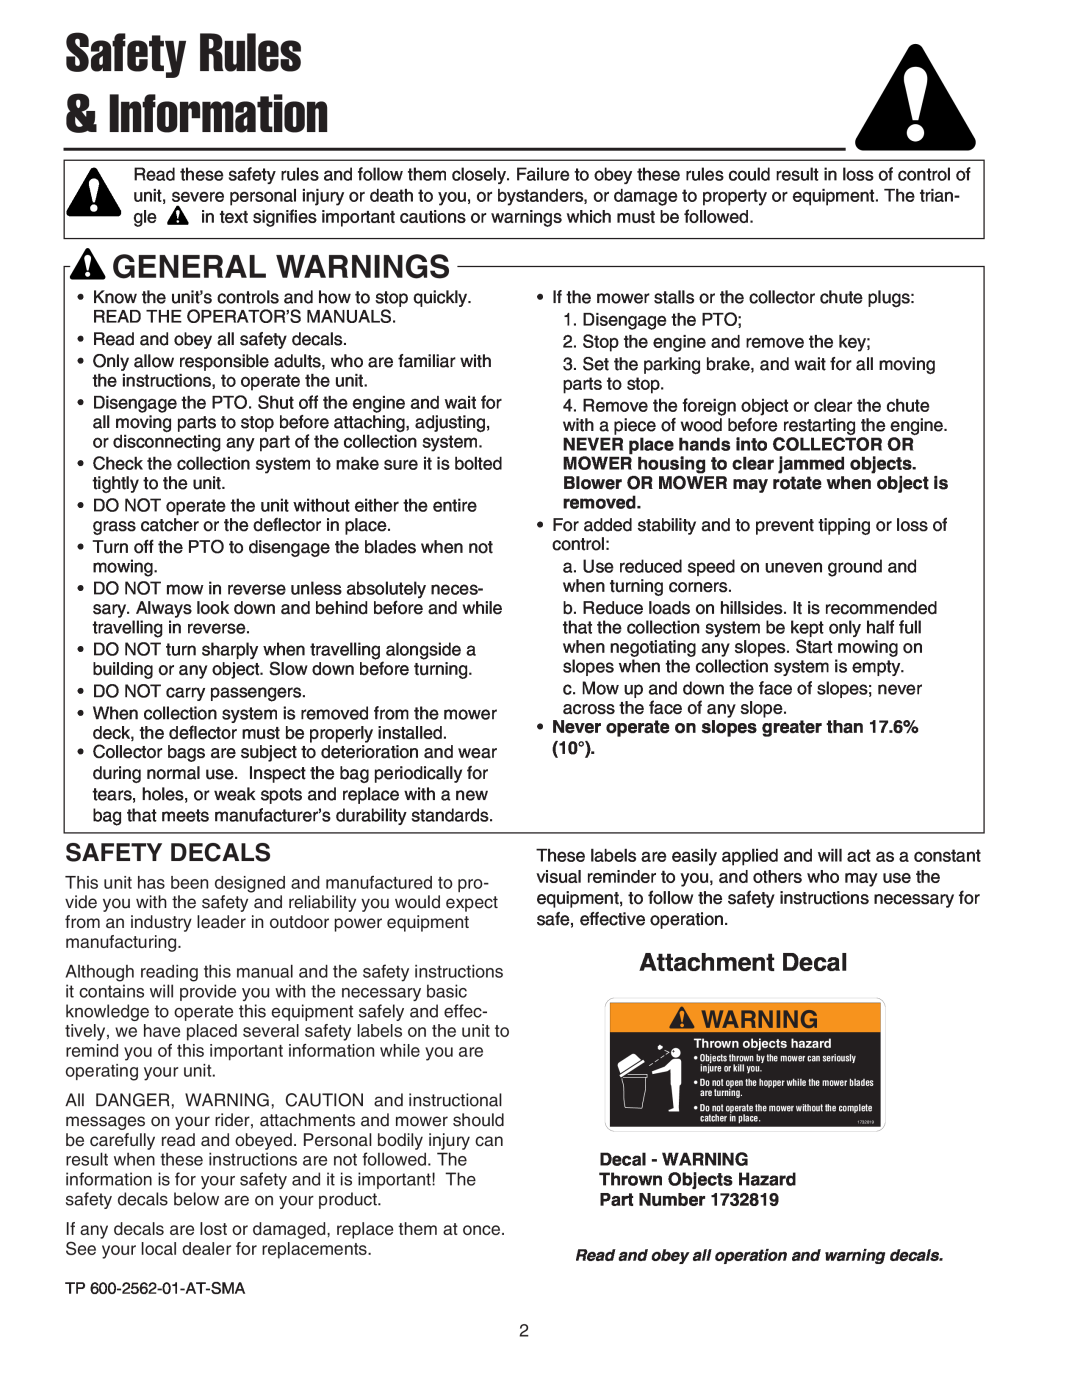 Simplicity 1694918 manual Safety Rules Information, Safety Decals, Attachment Decal, General Warnings 